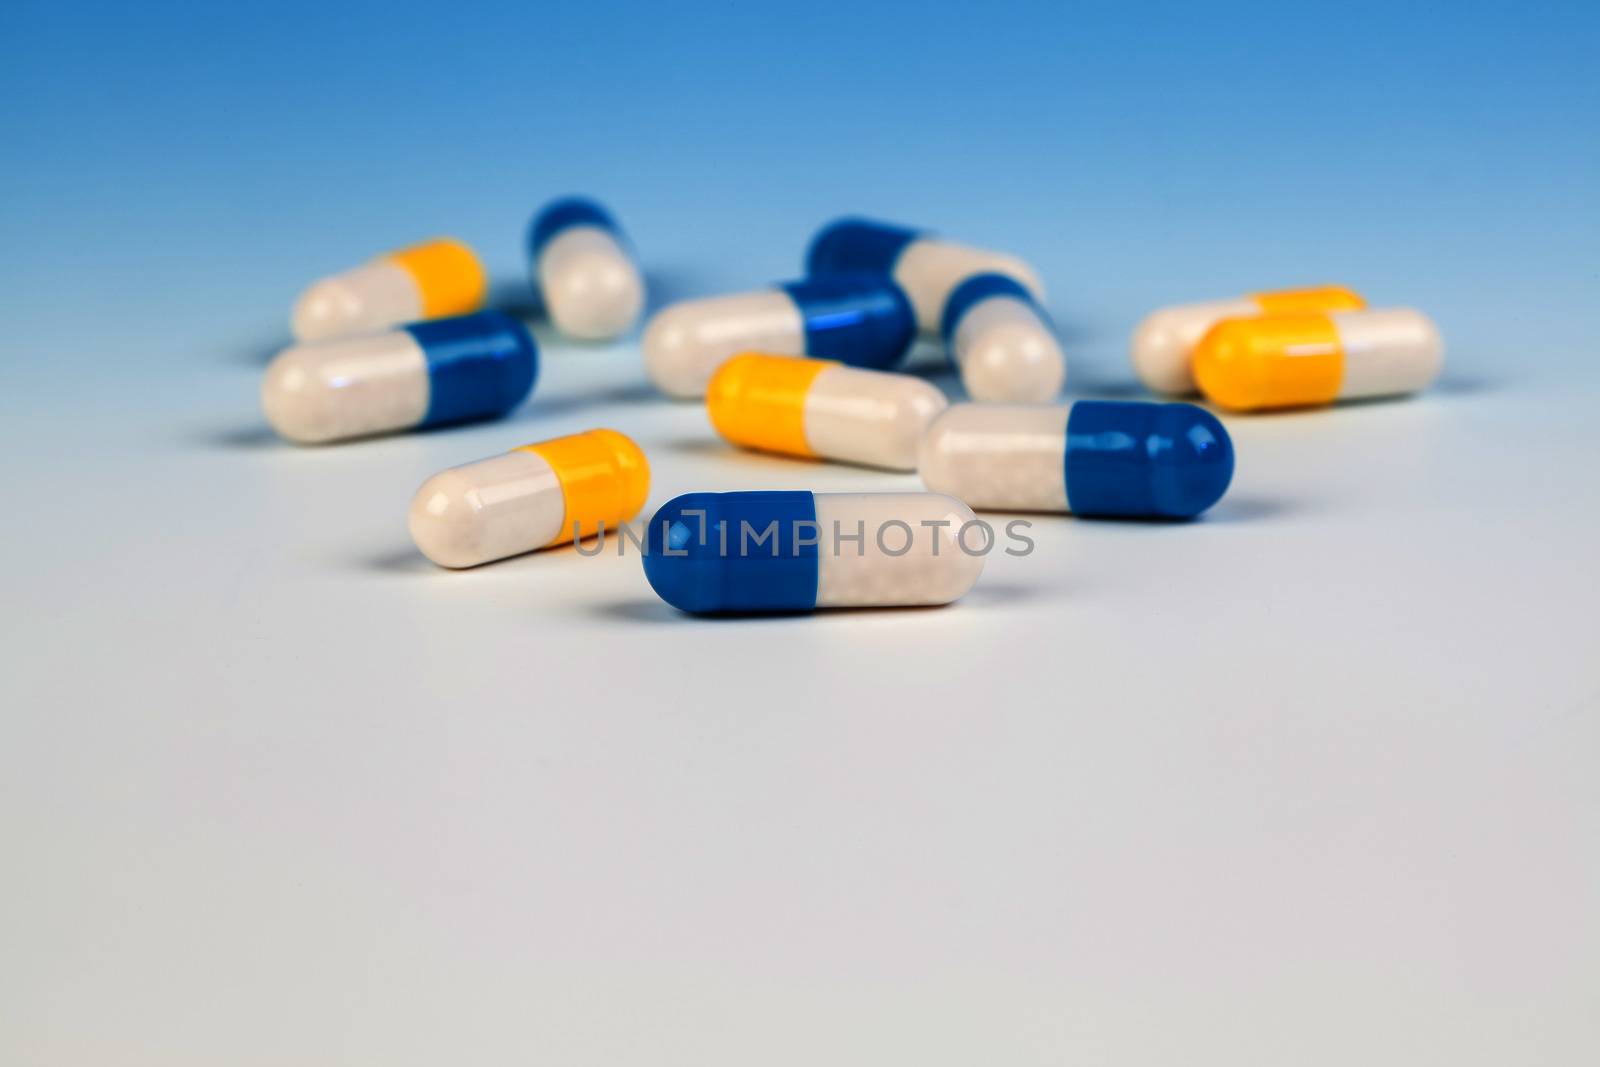 Colorful medical capsules on white background.